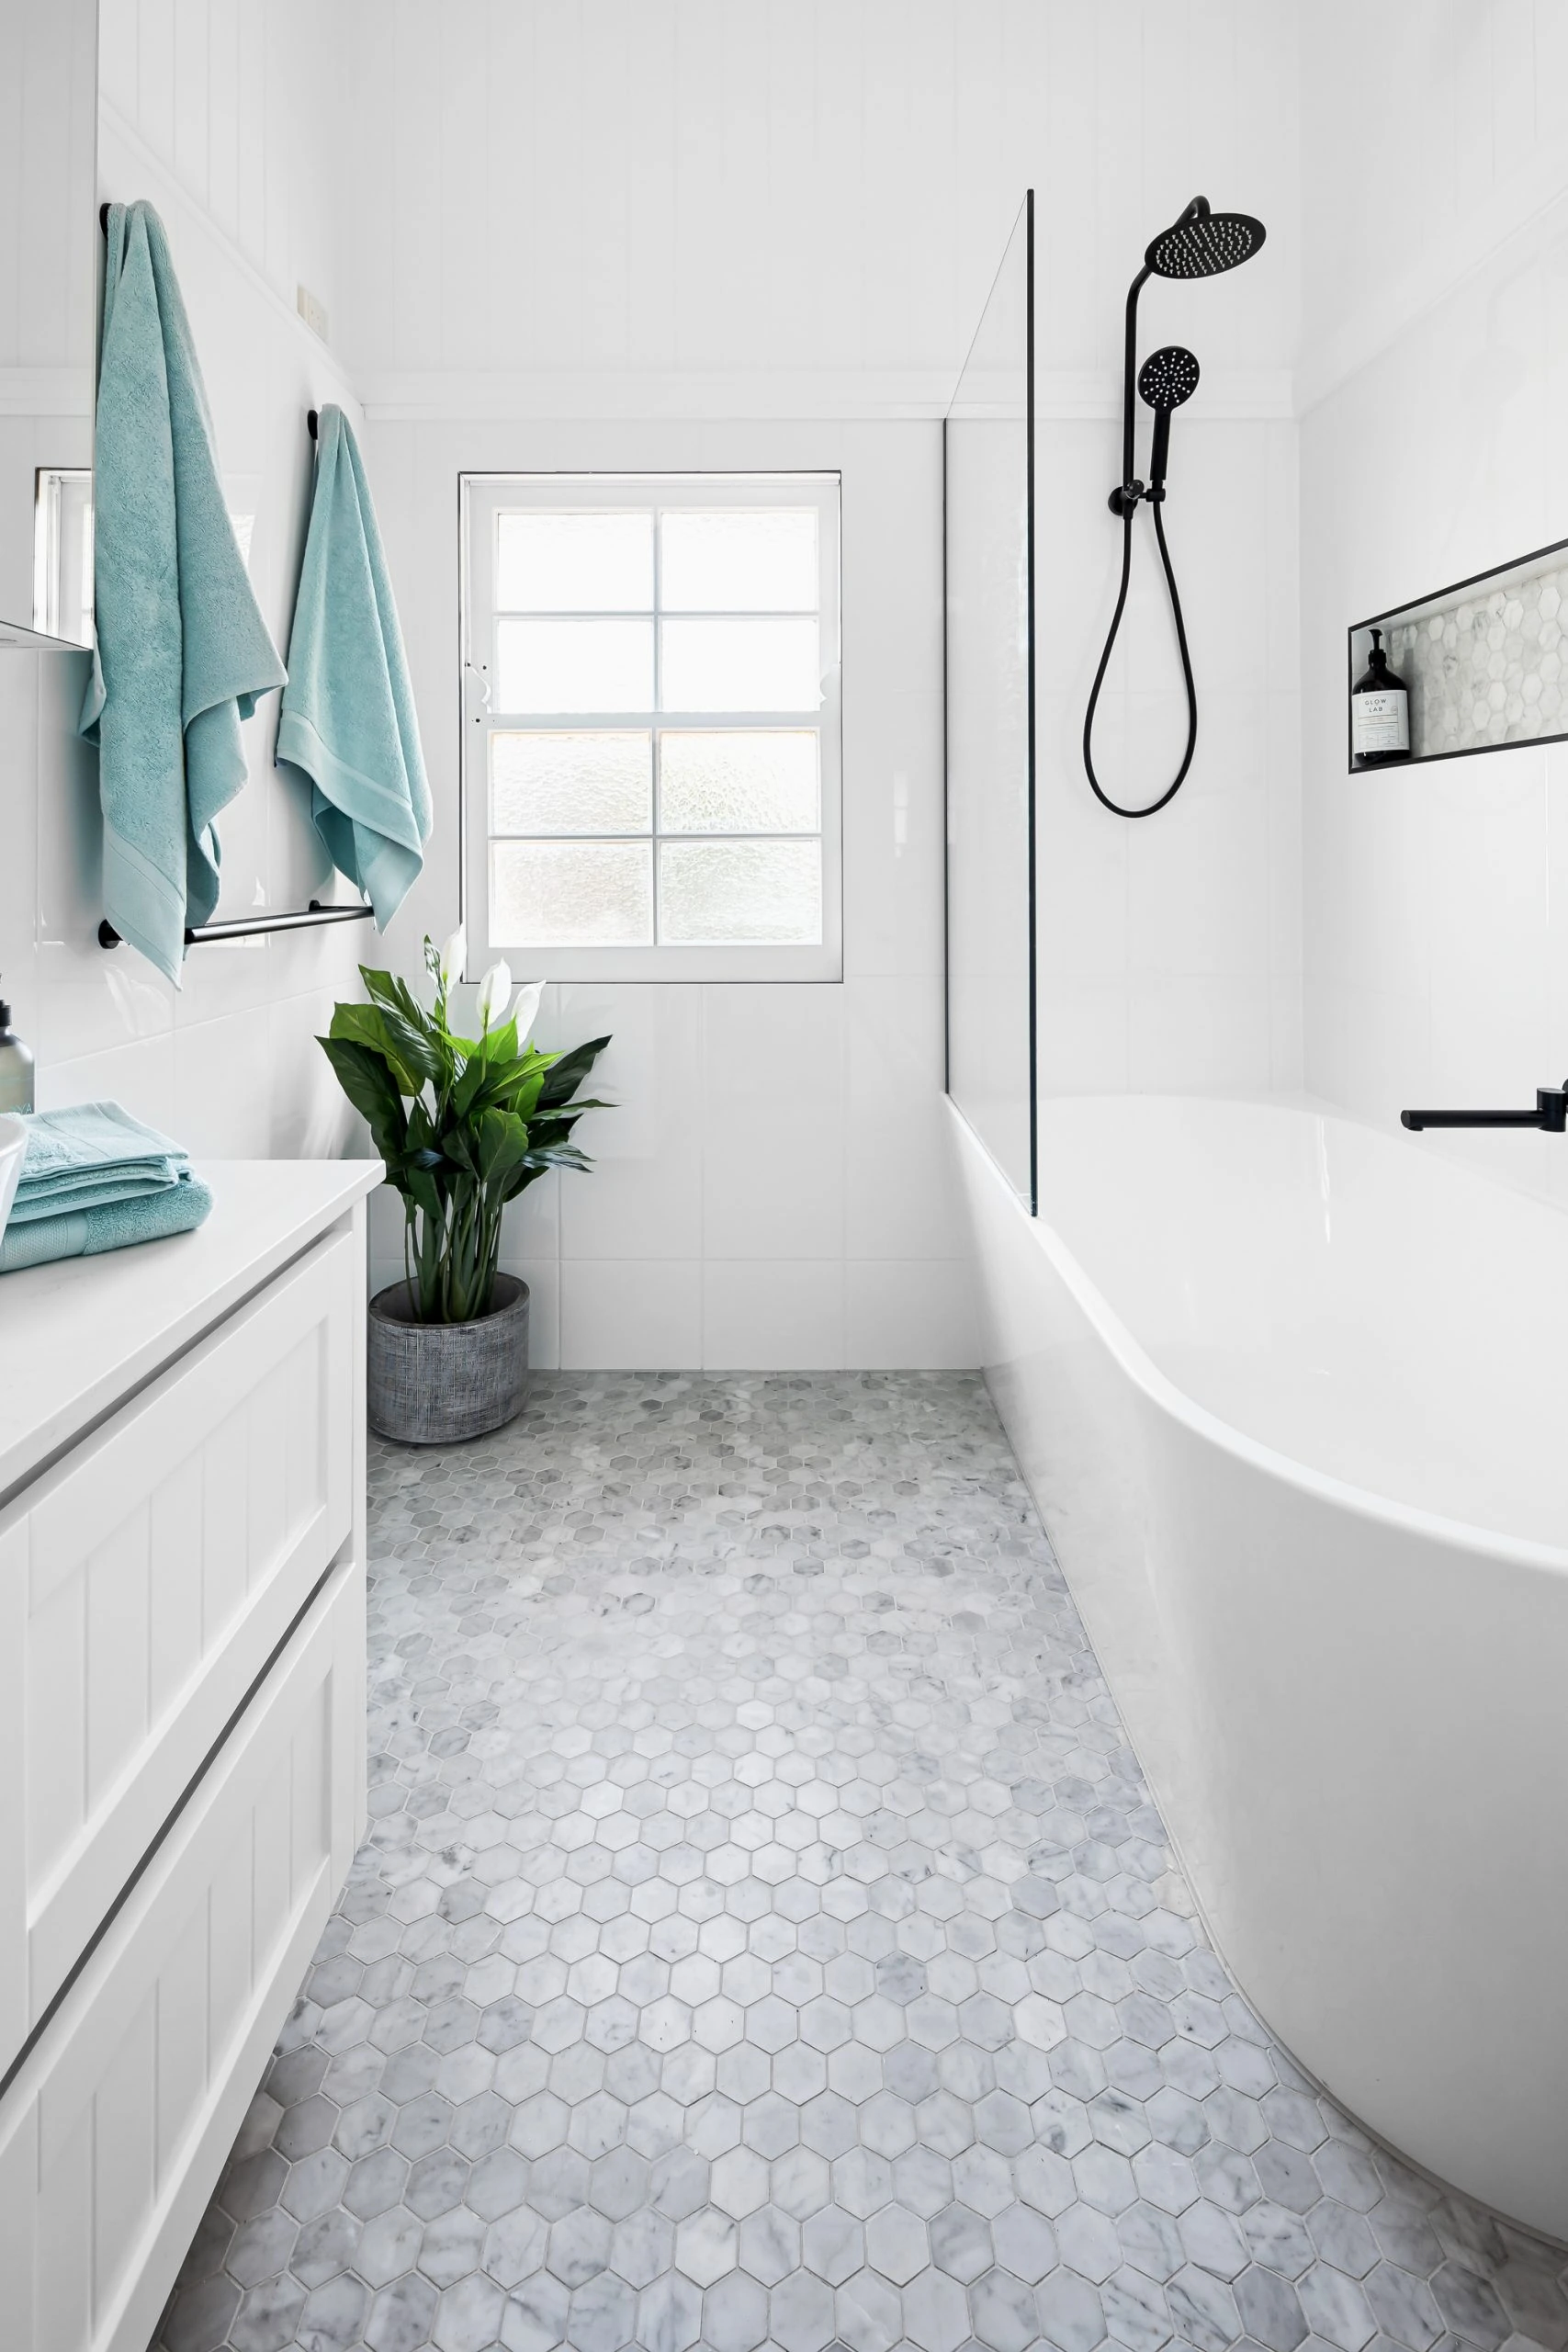 White bathroom with black details and blue towels